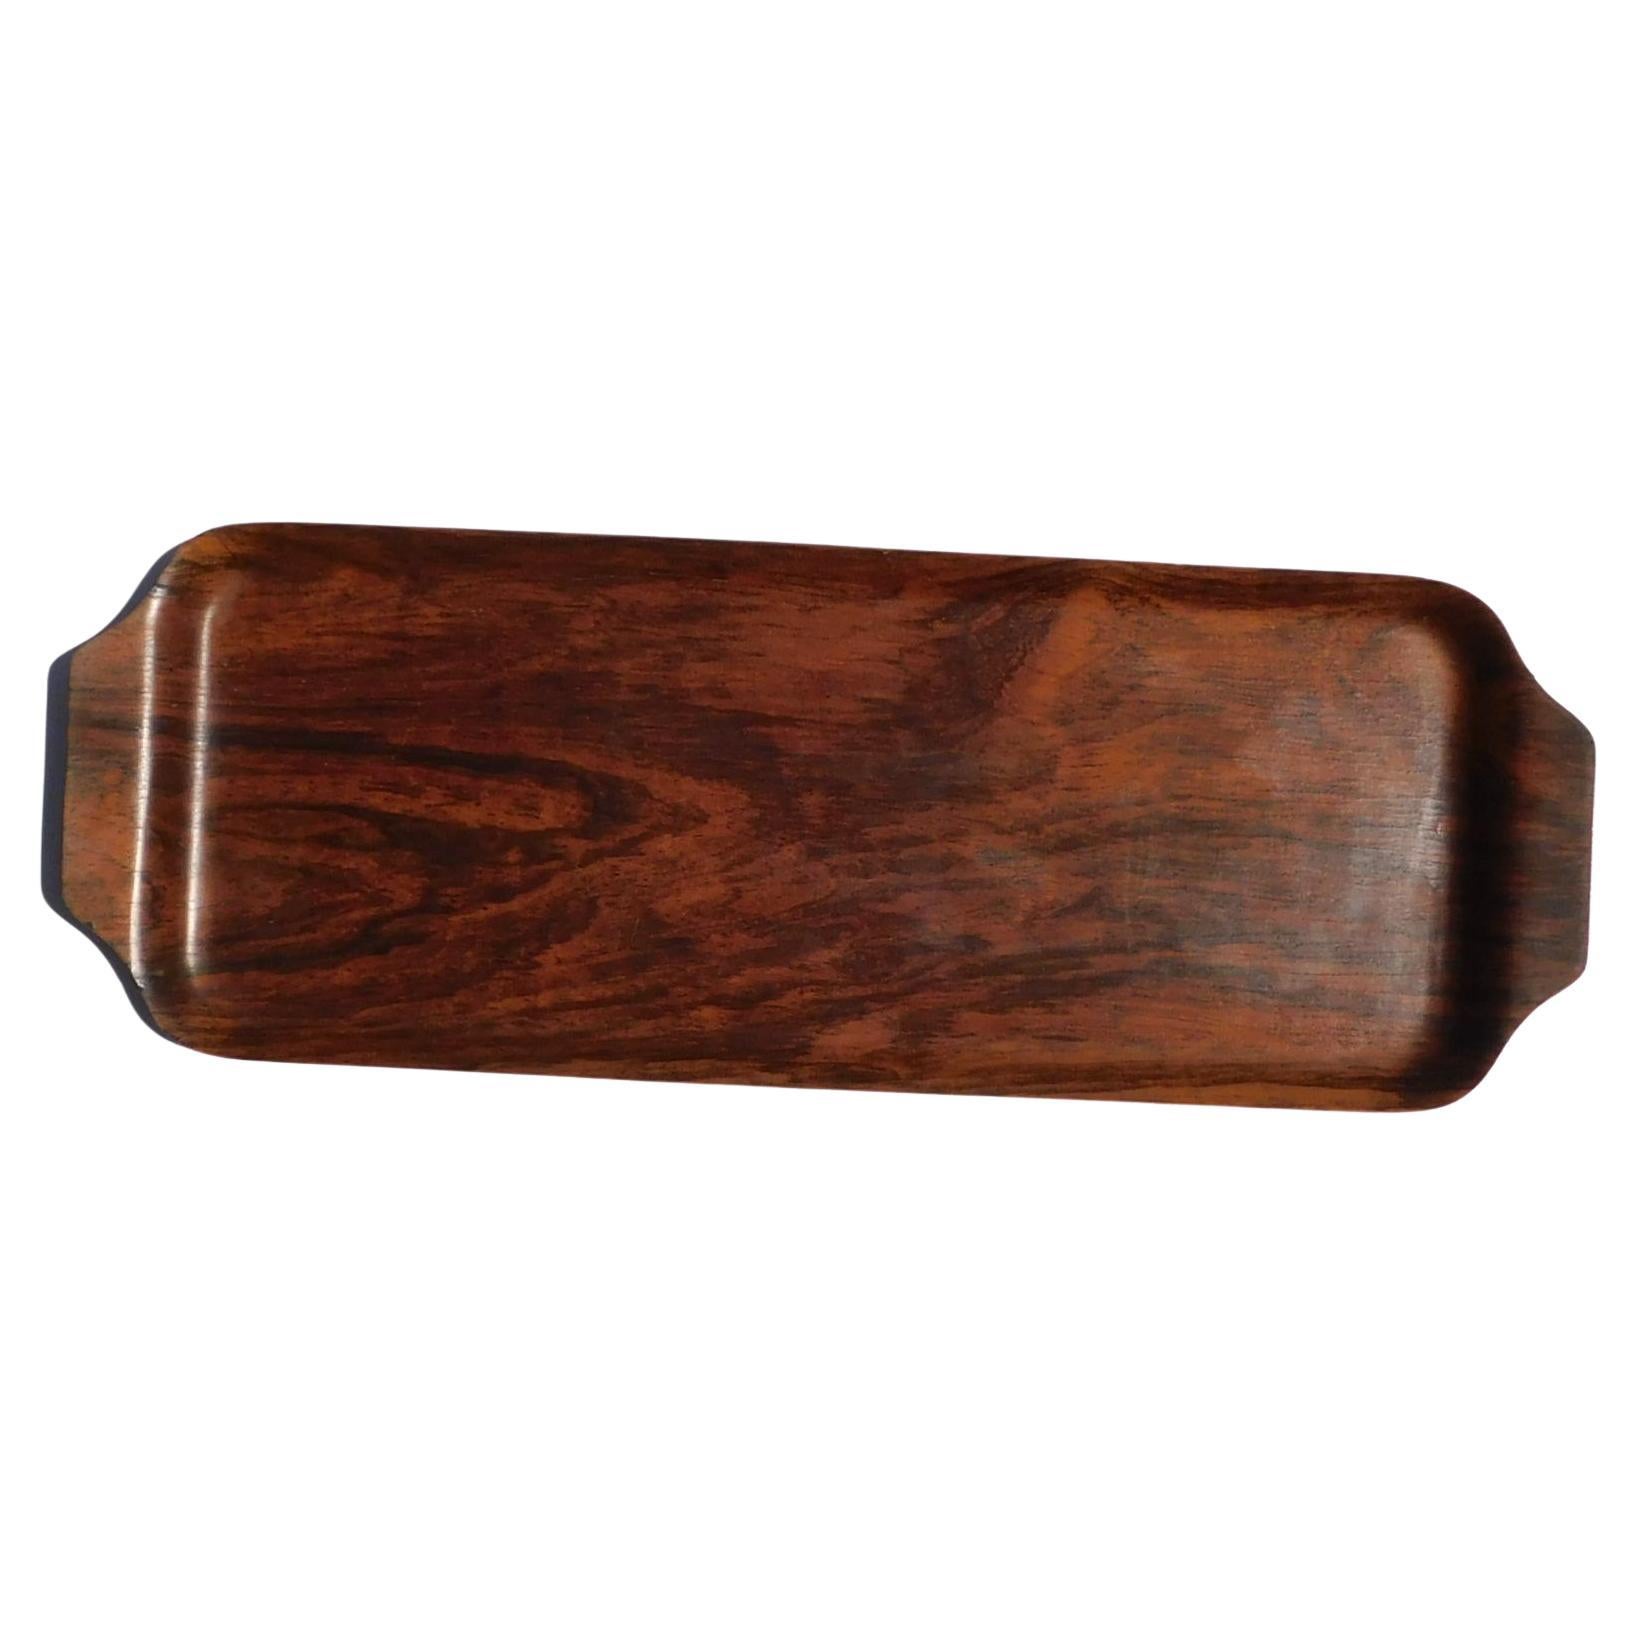 Danish Rosewood Serving Tray - Stamped Made in Denmark - Circa 1960's